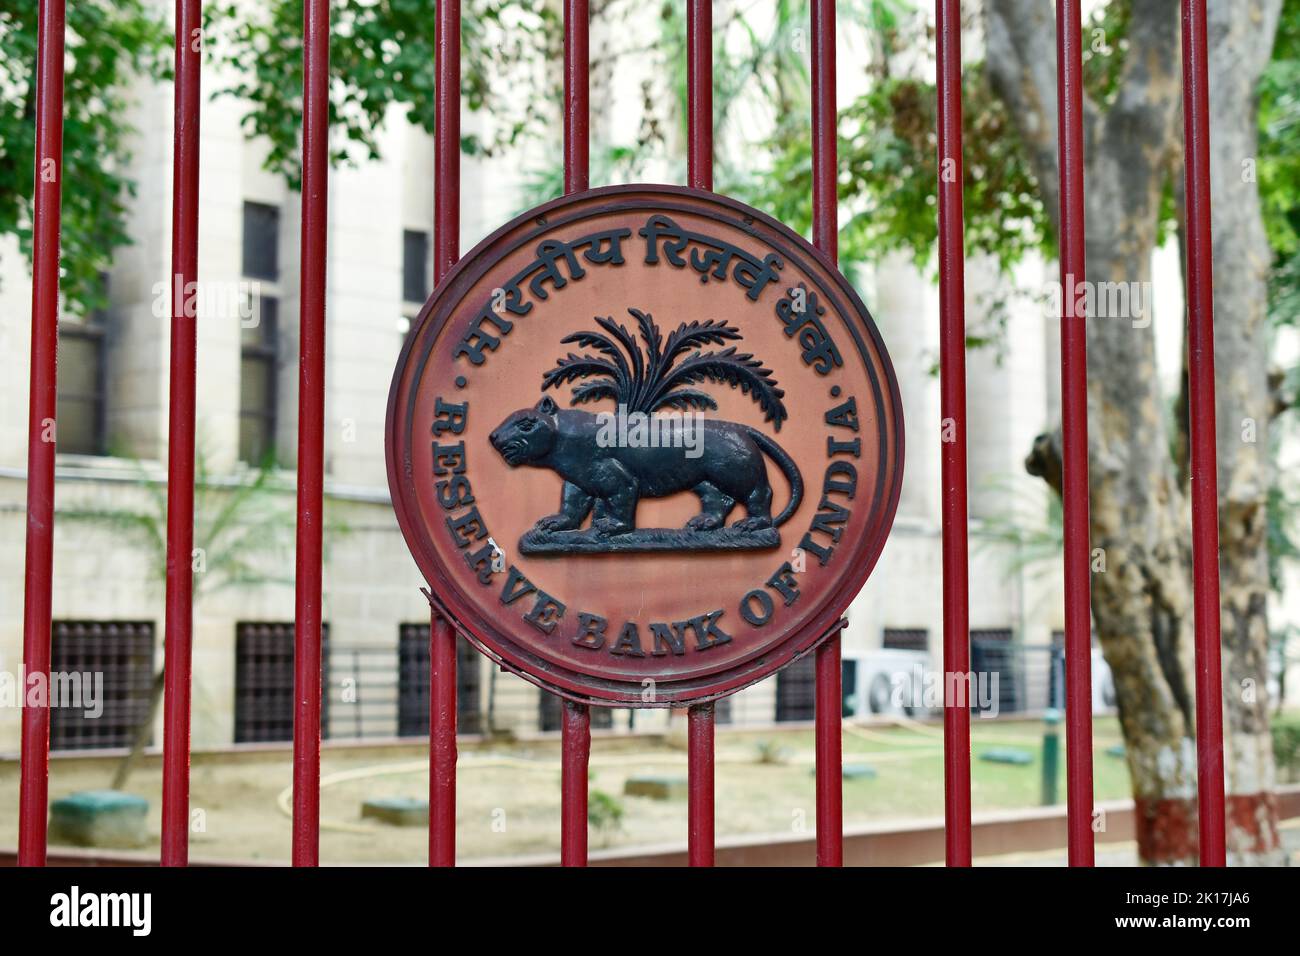 New Delhi, India - 14 September 2022 : RBI logo at the gate of reserve bank of india Stock Photo